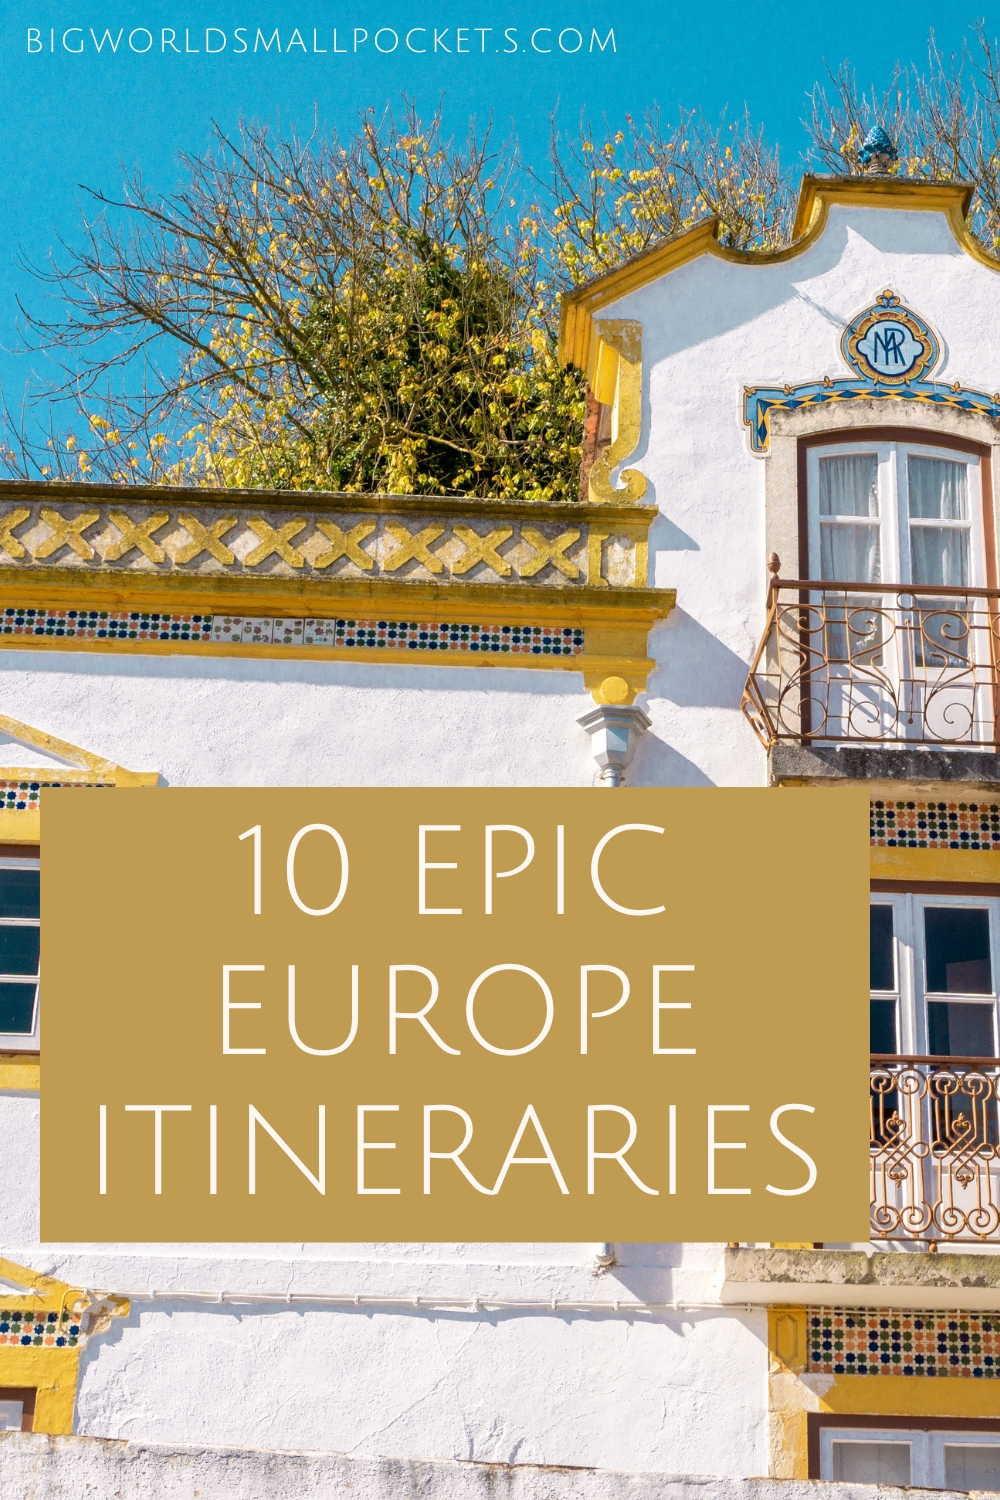 10 Epic Europe Itineraries for Every Season